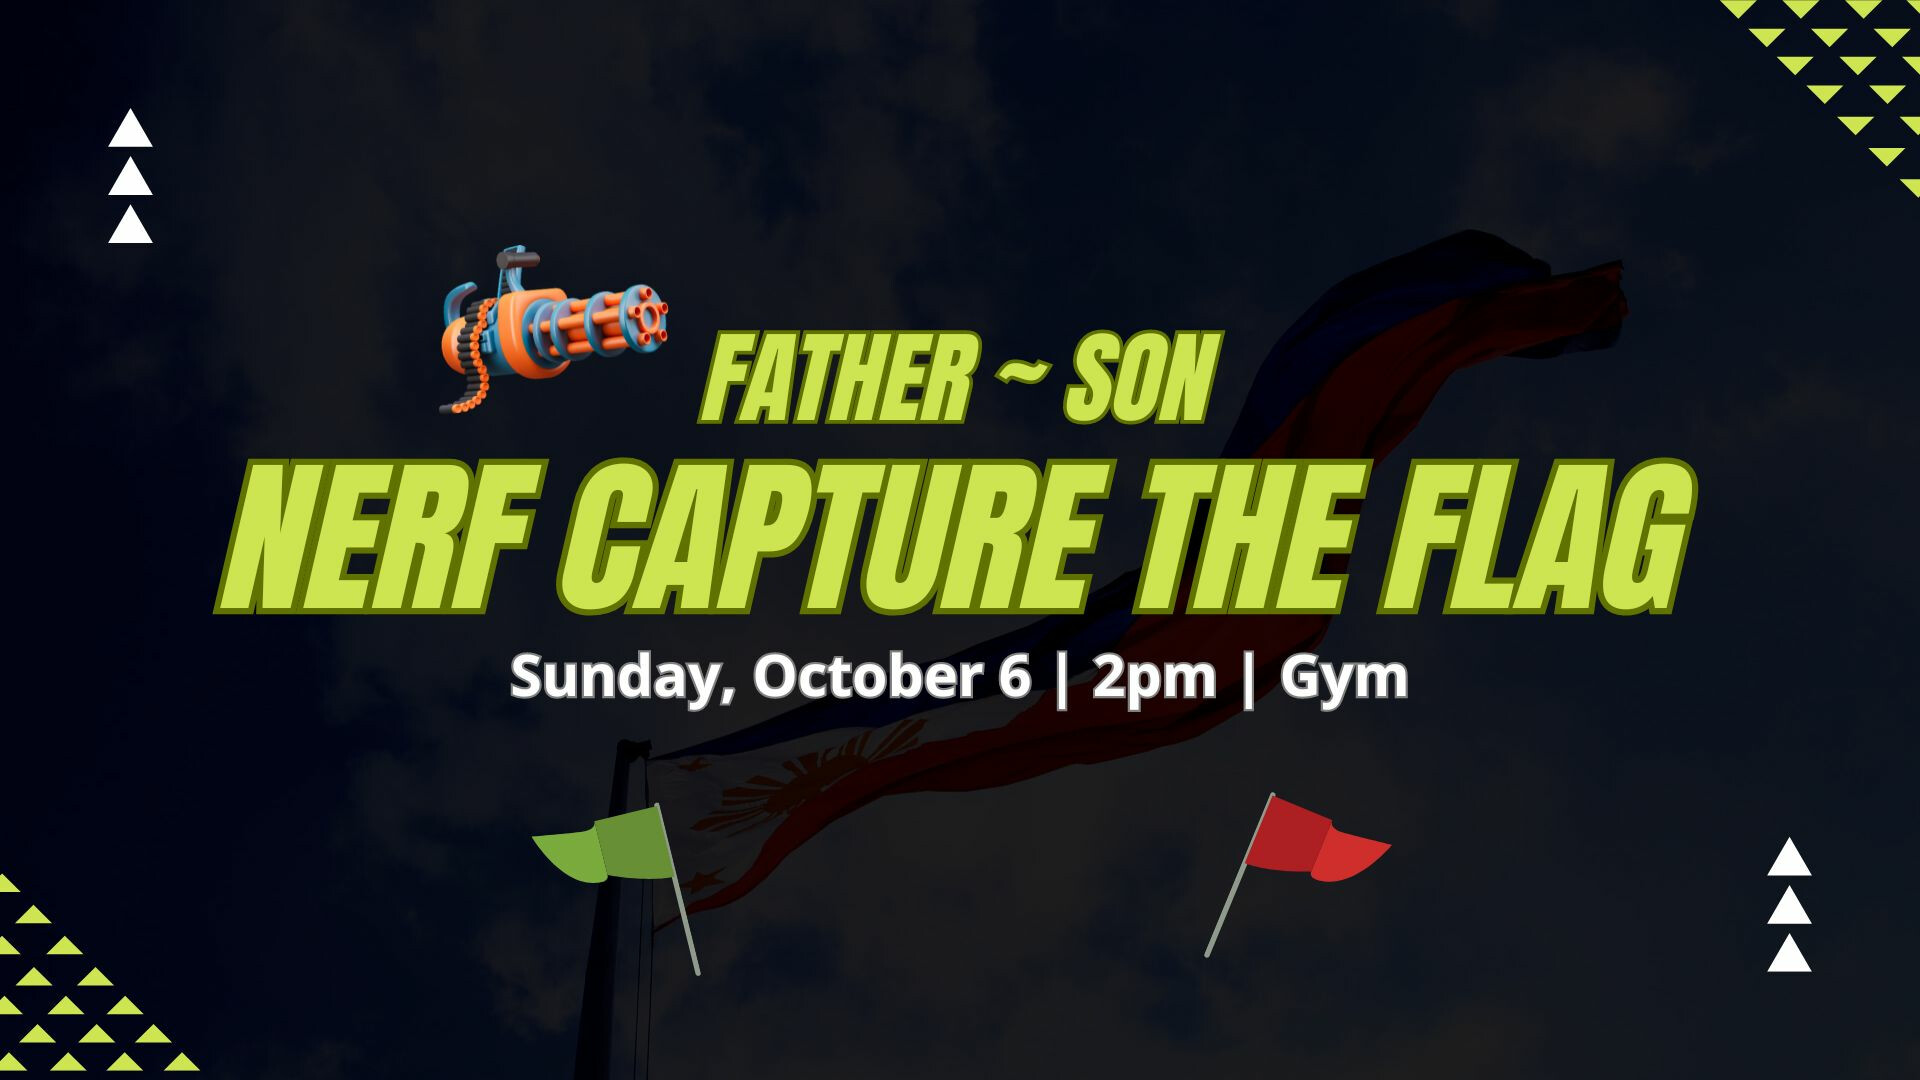 Father Son Nerf Capture the Flag